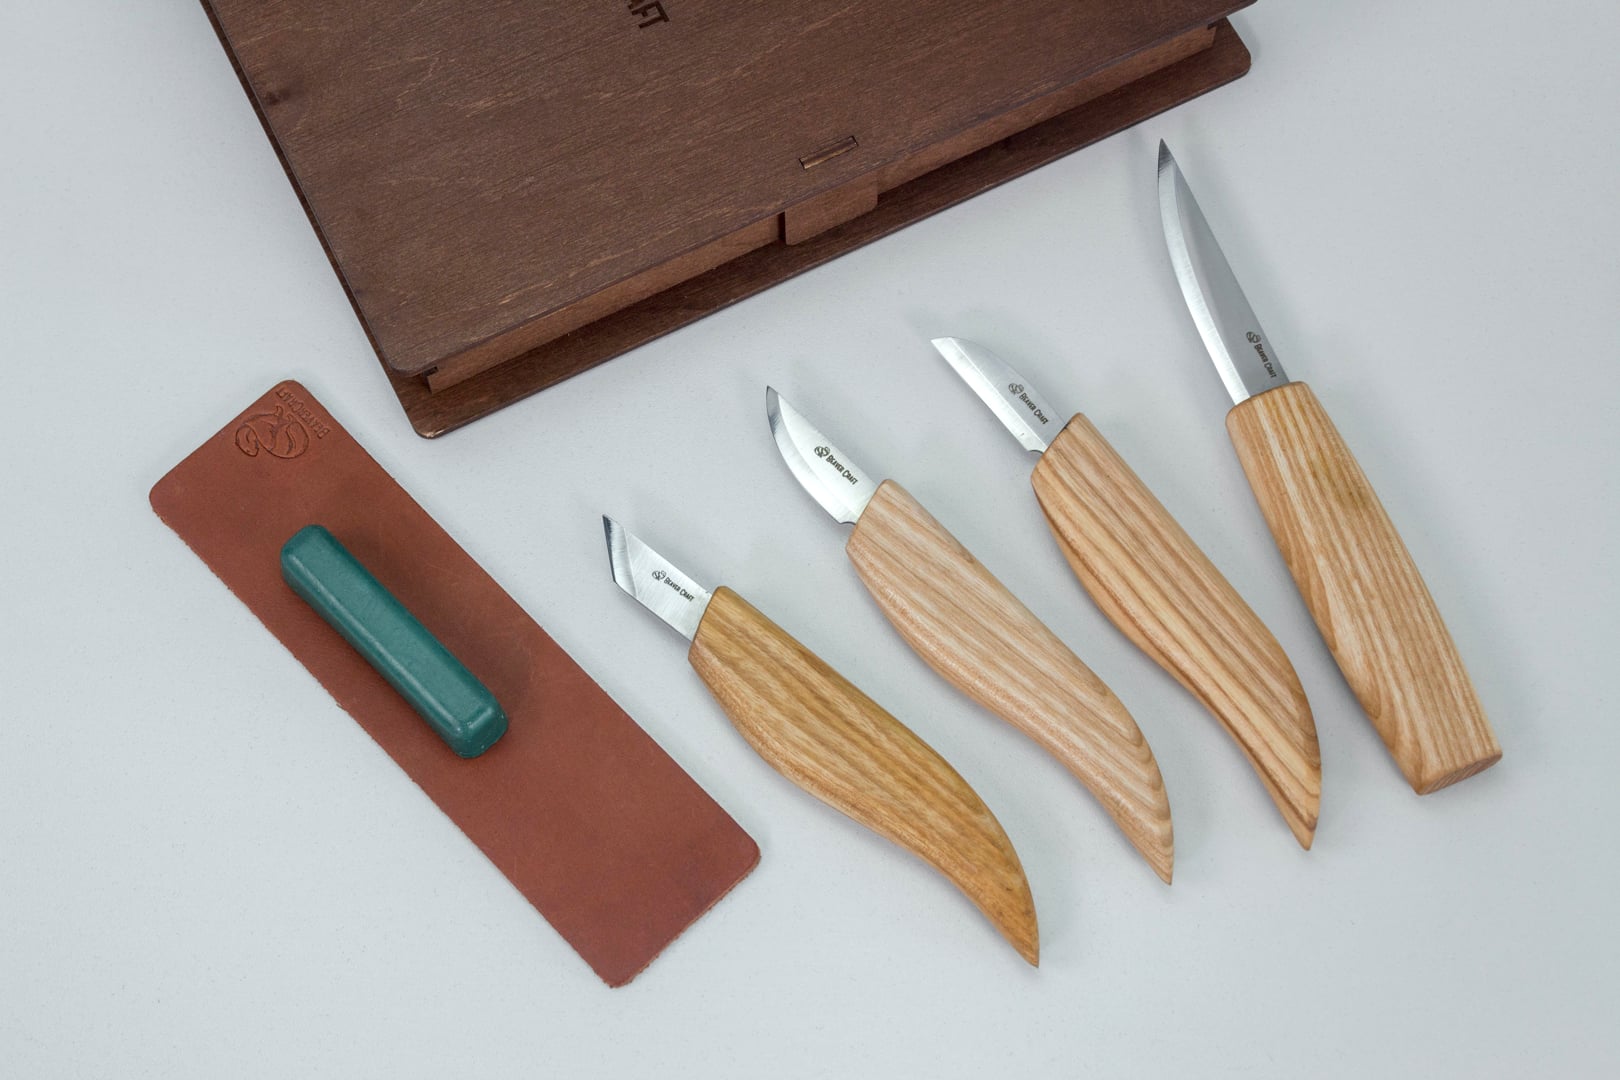 Buy S07 Book - Basic Knives Set of 4 Knives in a Book Case online –  BeaverCraft Tools